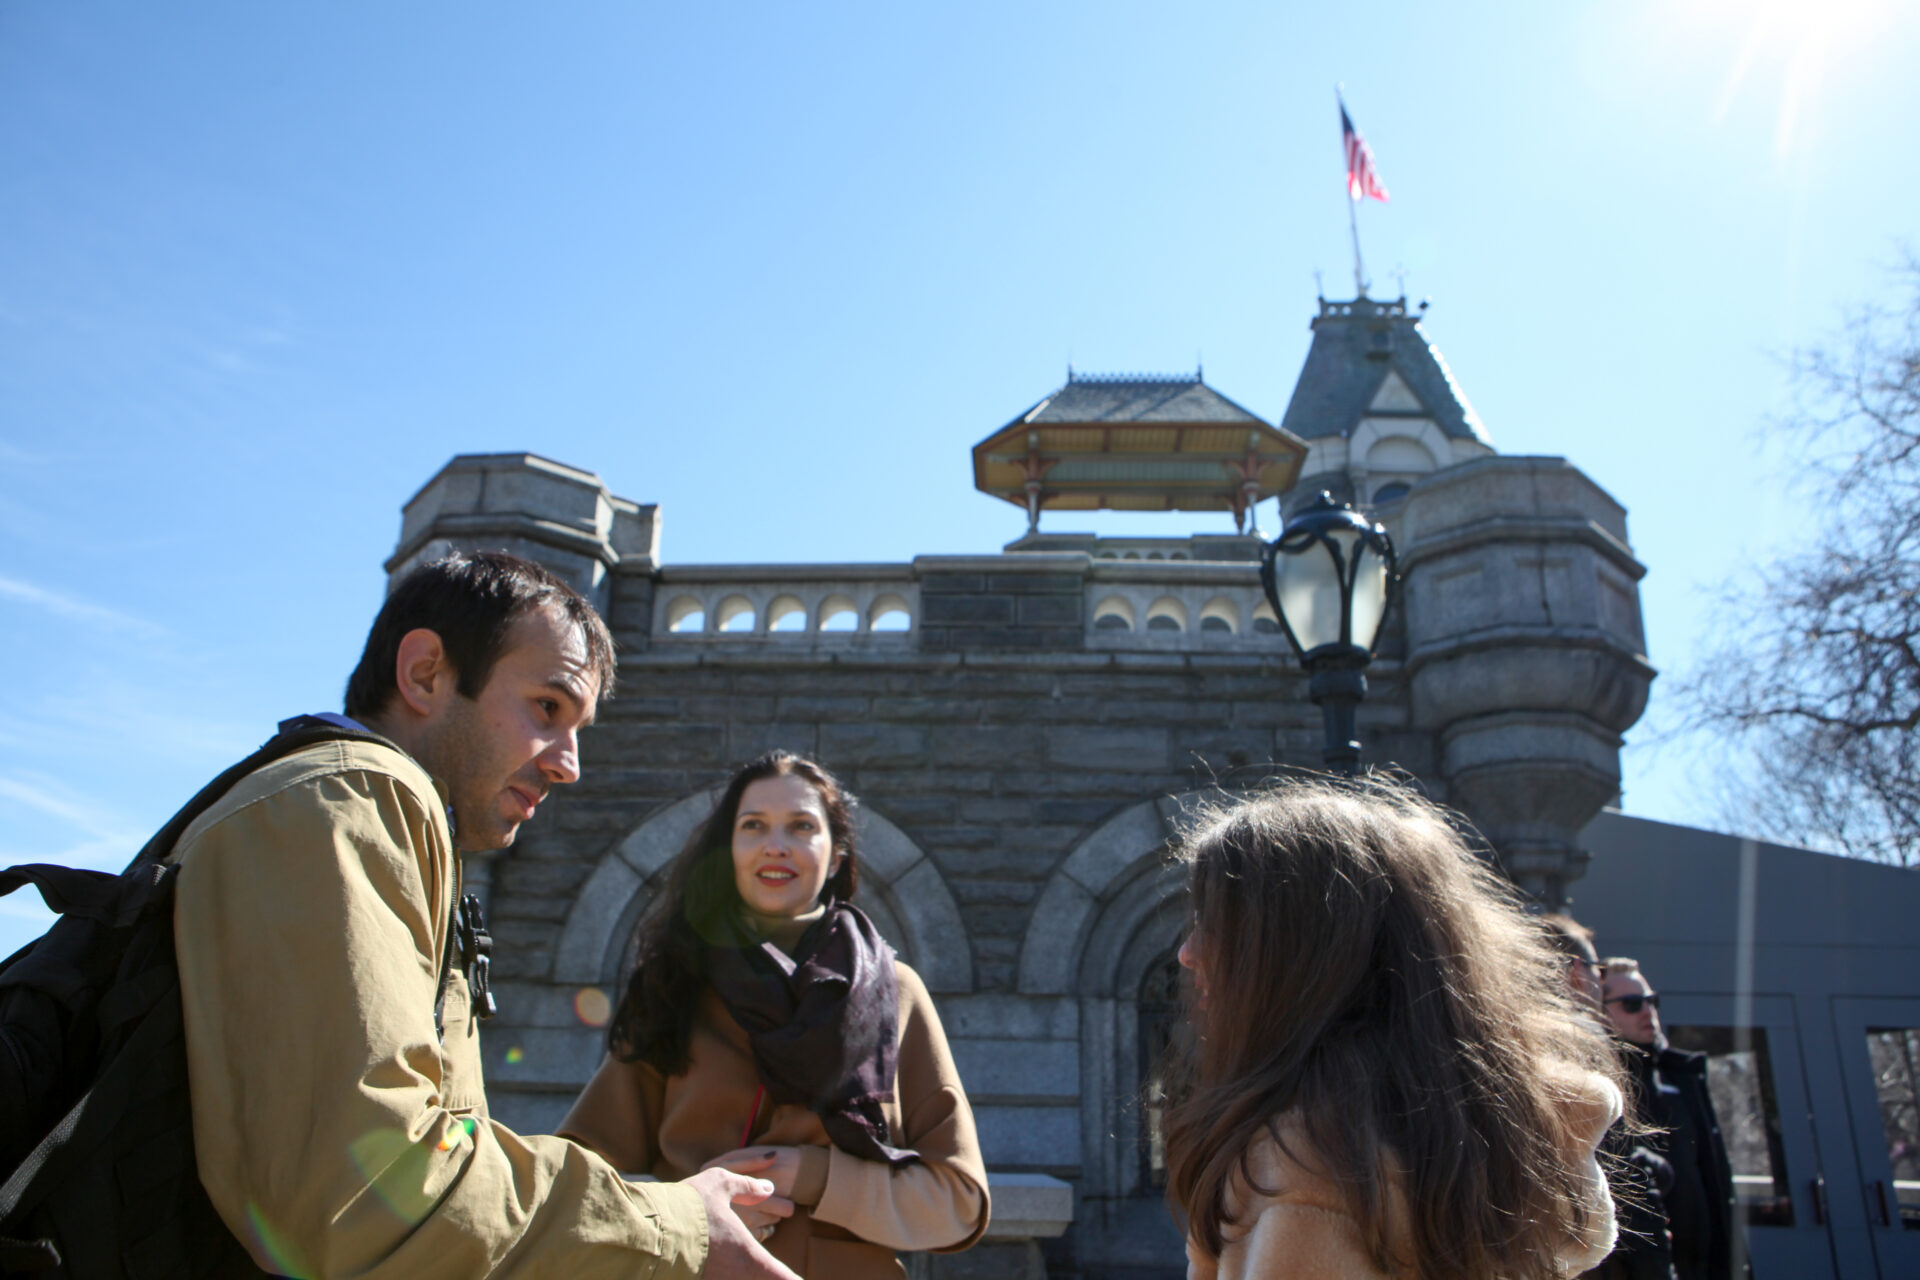 a guide whose facial expression is one of disgusted disbelief is looking at one of his younger guests while her mom poses in front of the Belvedere Castle in Central Park